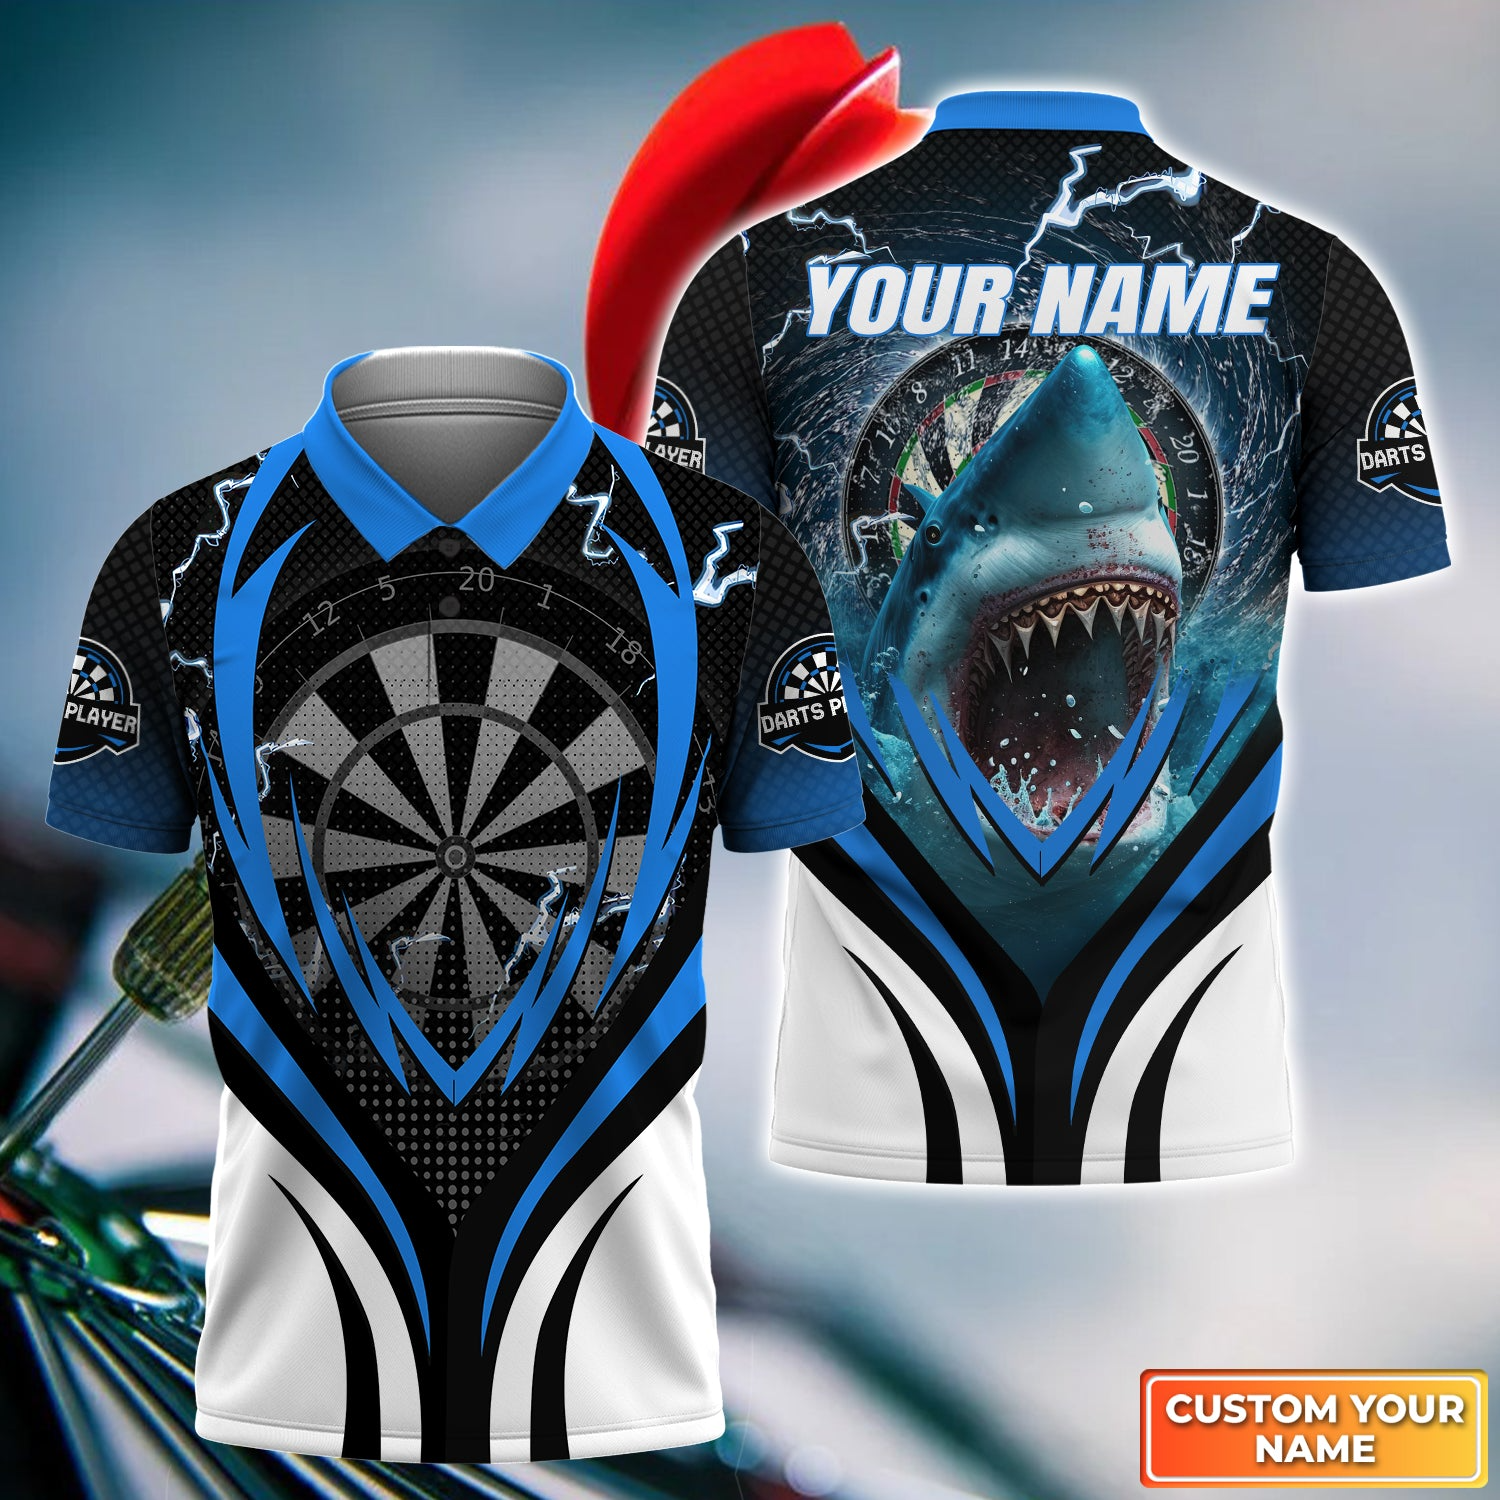 Customized Darts Men Polo Shirt, Personalized Name Awesome Shark & Darts Polo Shirt For Men, Perfect Gift For Darts Lovers